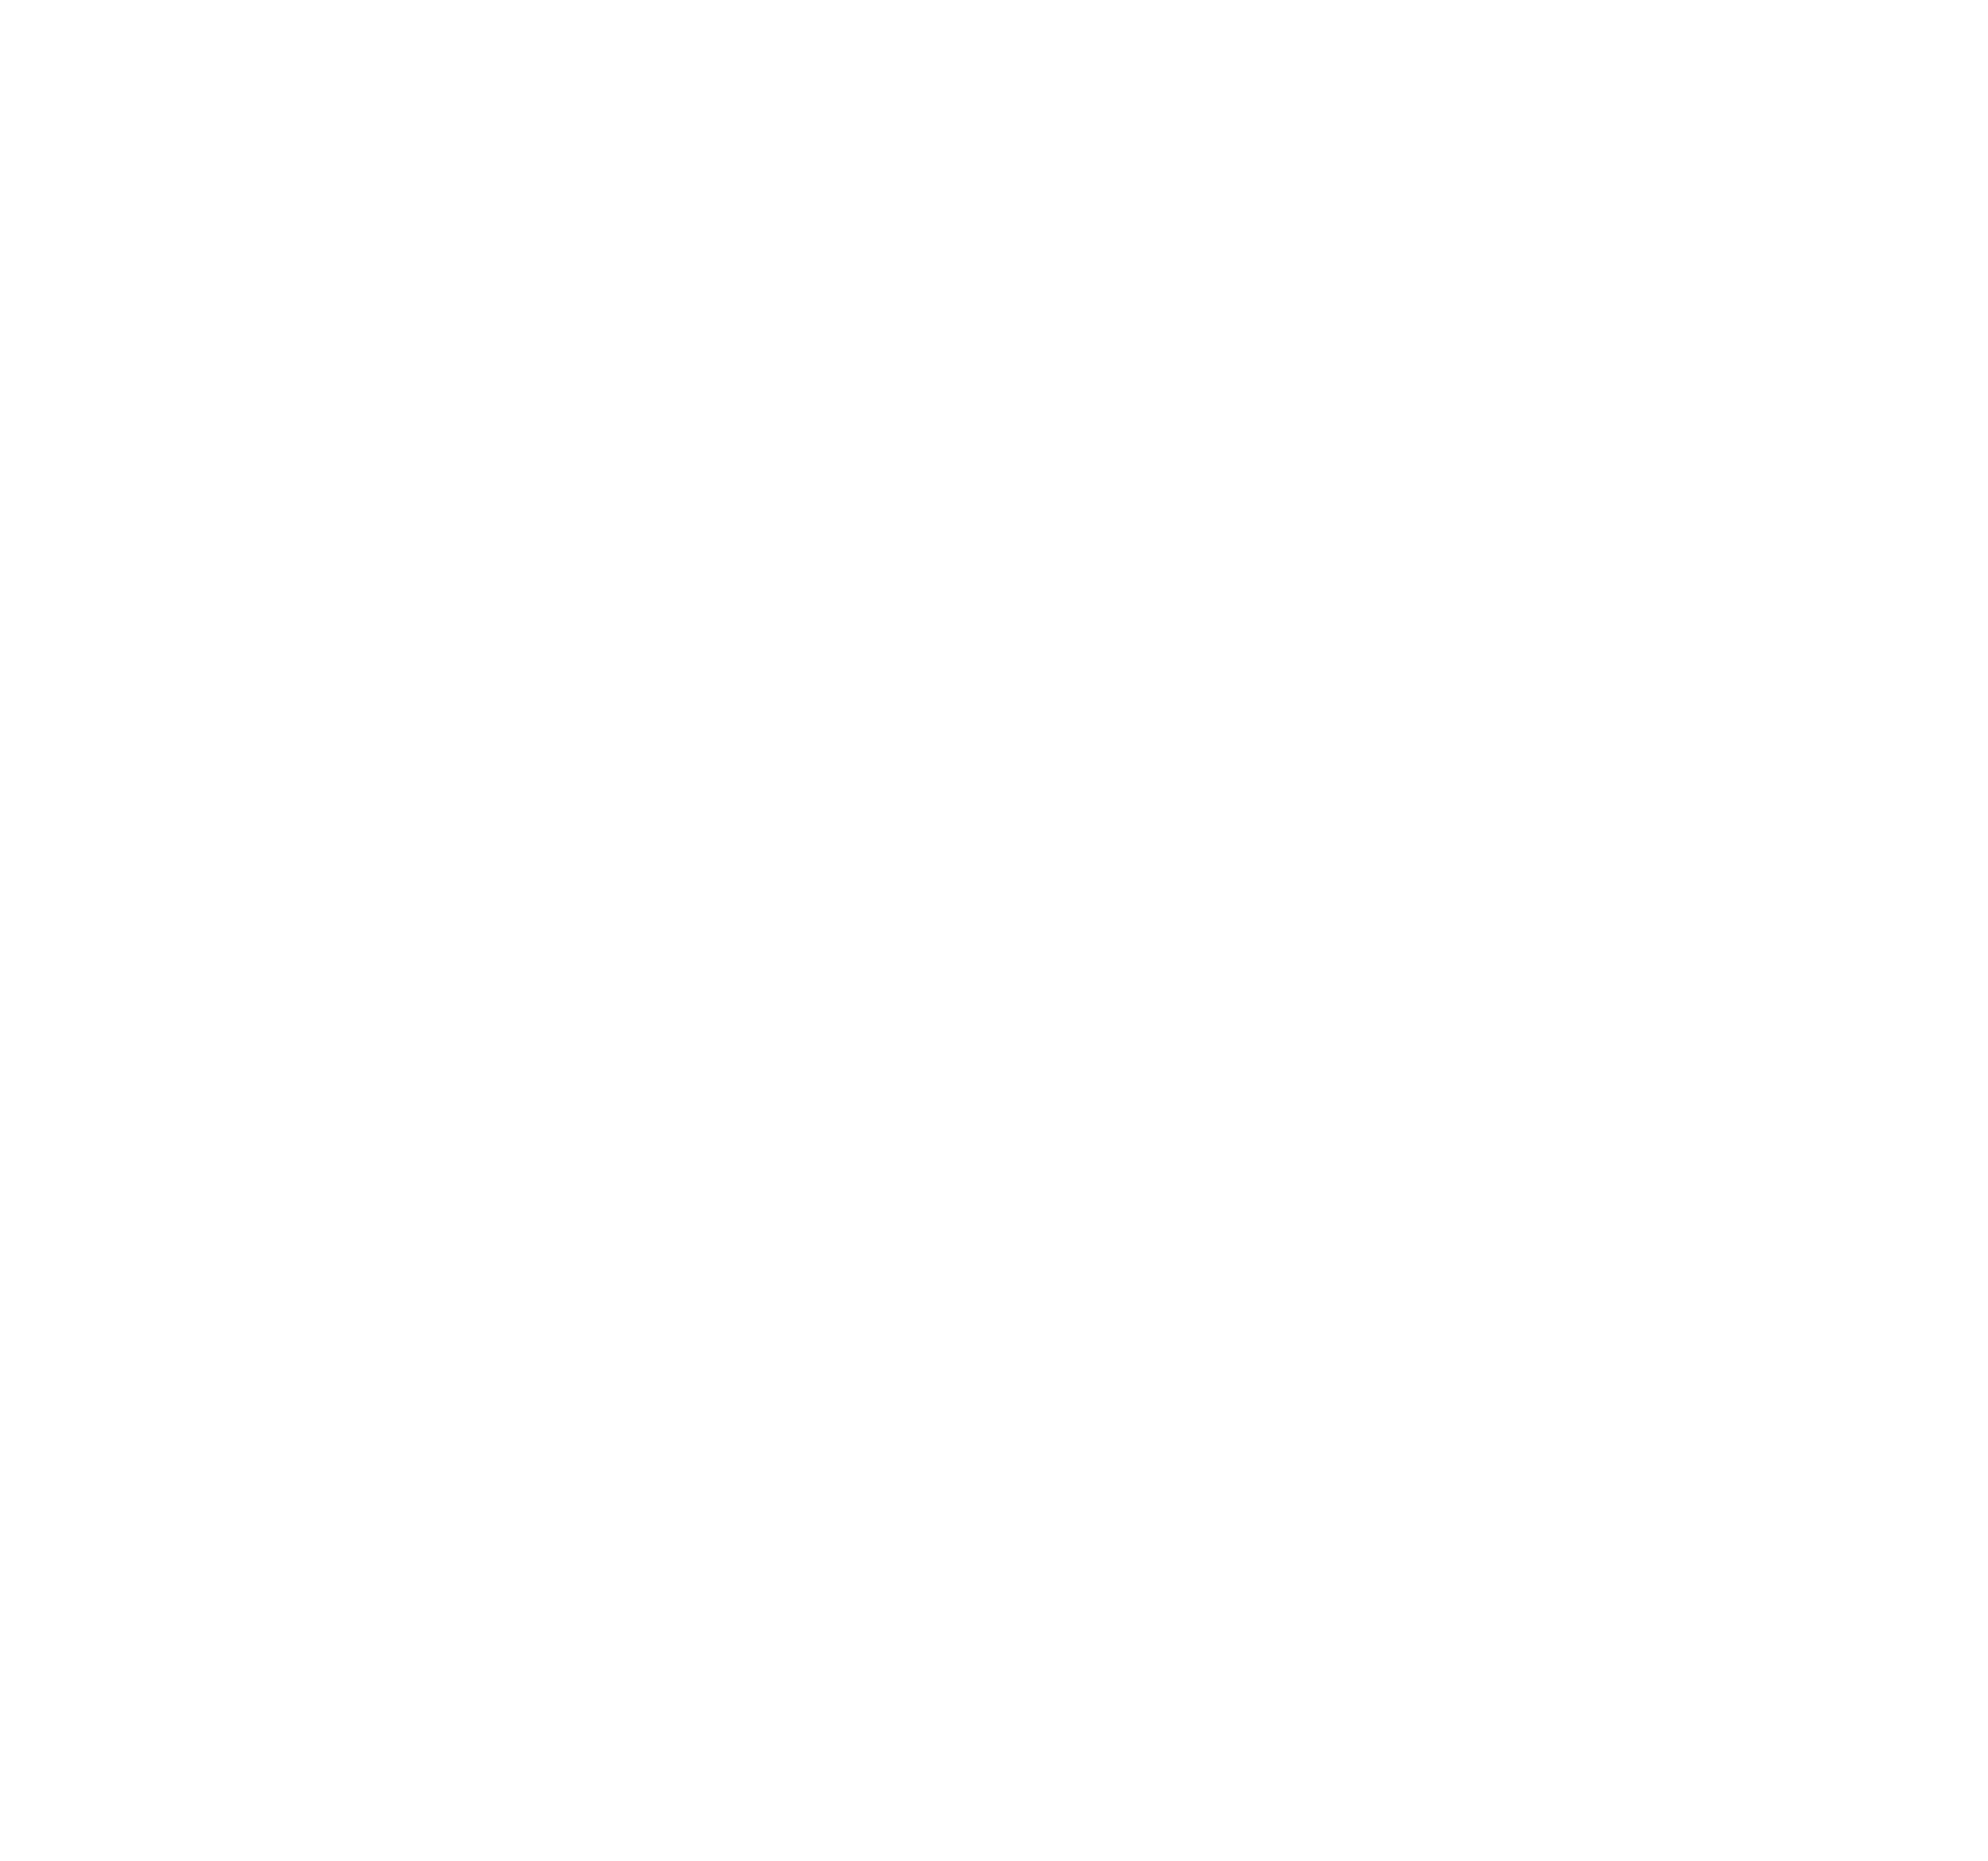 Xscapers - About Us 2